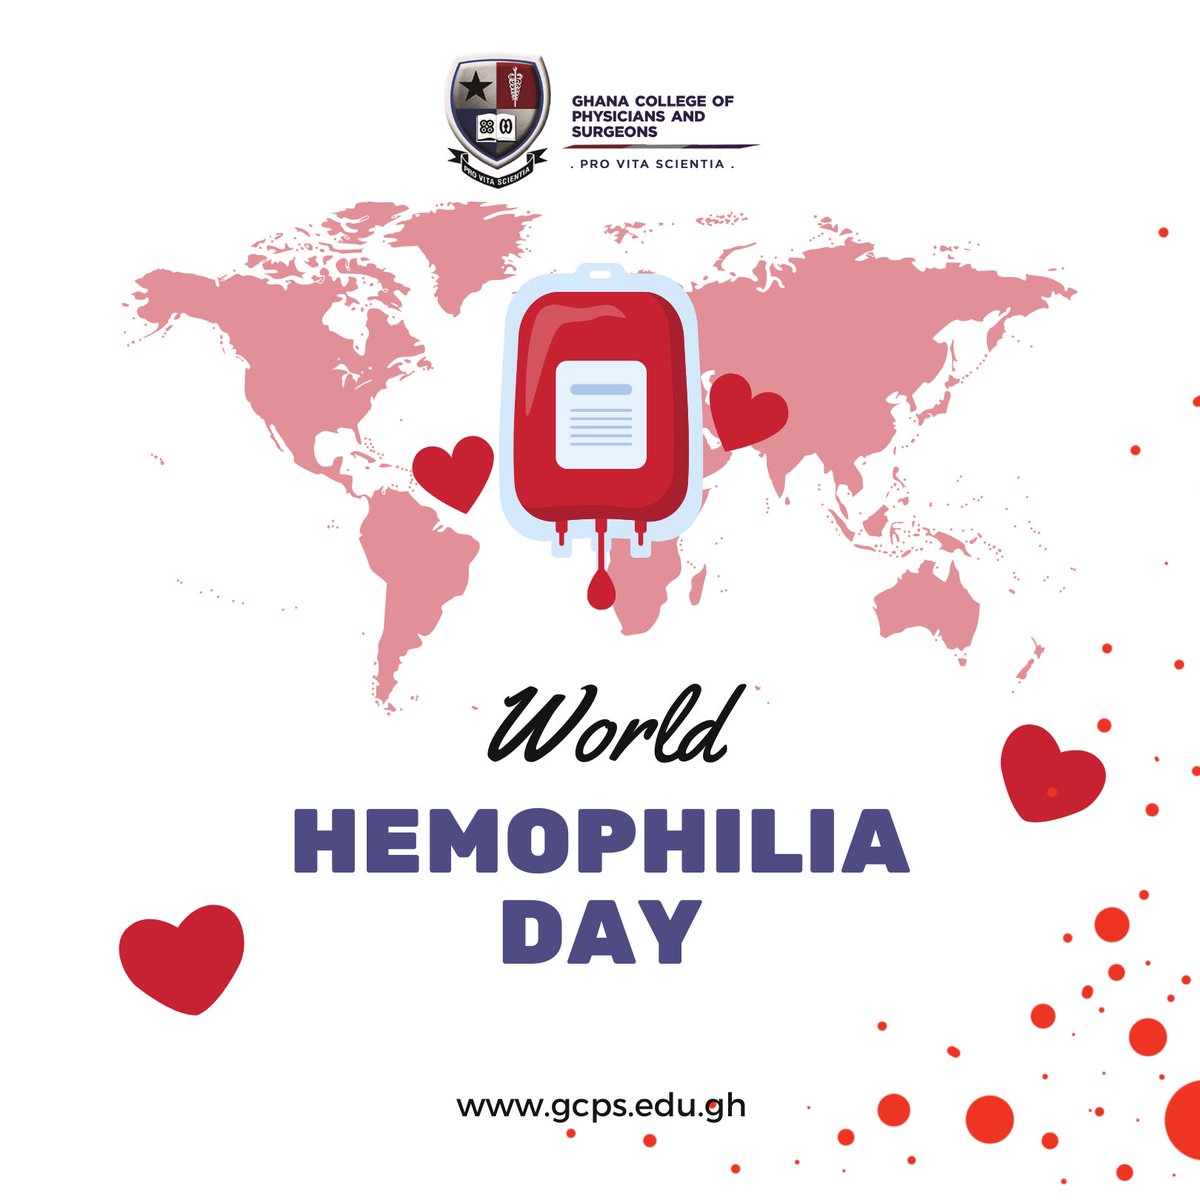 Hemophilia is a medical condition in which blood doesn’t clot normally. This often leads to excessive bleeding when an injury occurs 

#WorldHemophiliaDay
#PublicAwareness